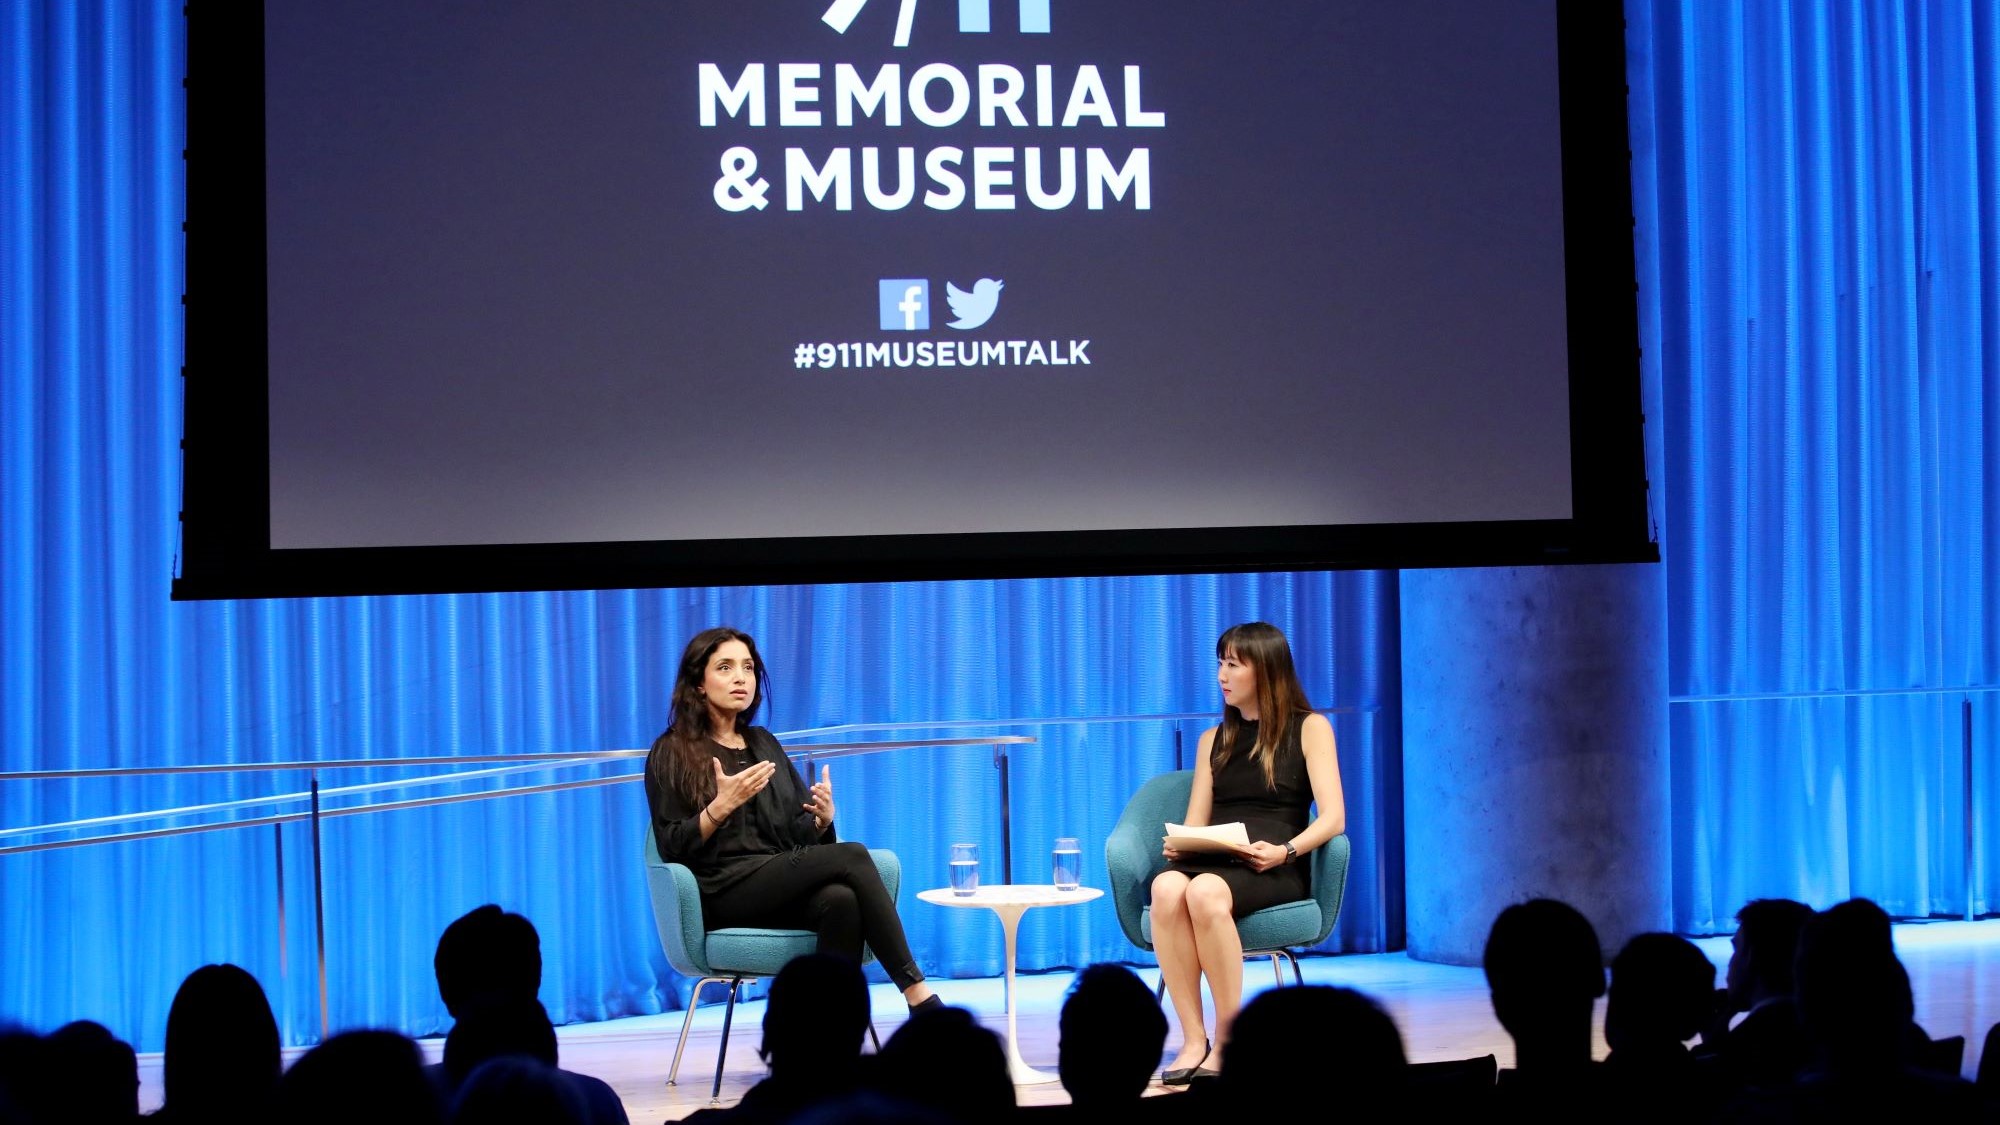 Emmy Award–winning documentarian Deeyah Khan speaks with a woman onstage during a public program at the Museum Auditorium. Khan gestures with both hands as she looks out towards the audience, who are silhouetted by the stage lights. A large projection screen has been lowered above her and the woman hosting the event.